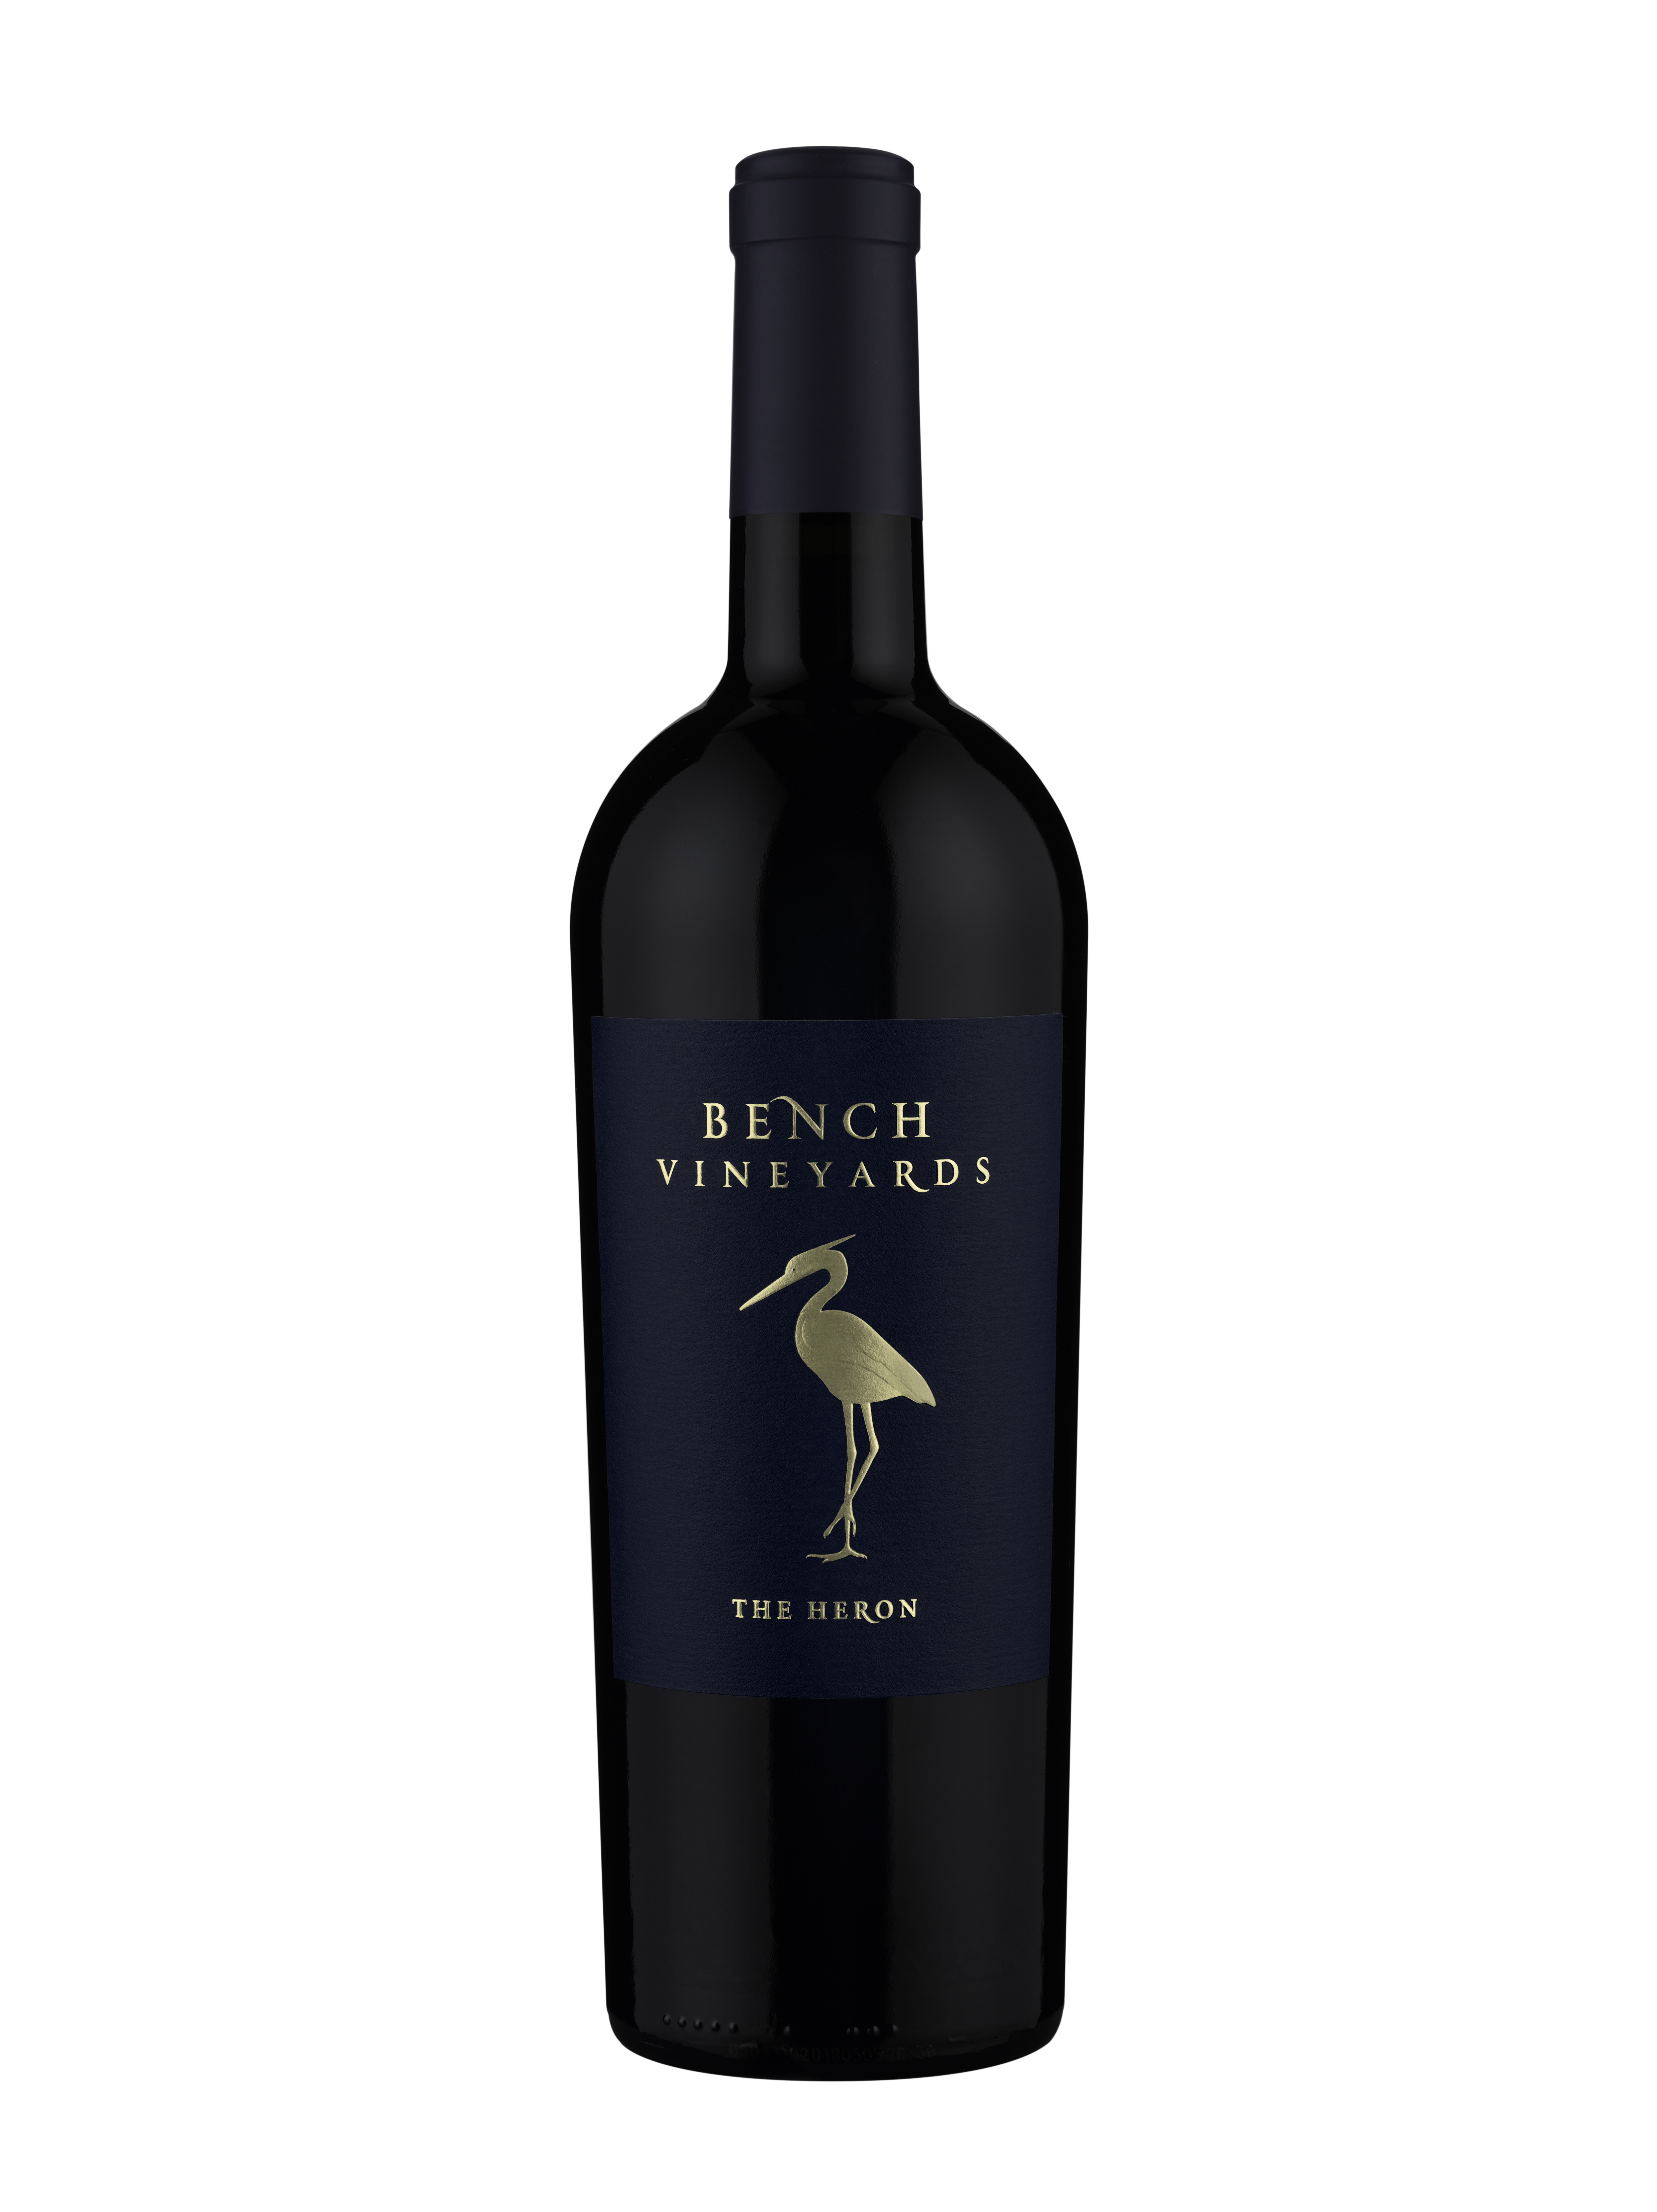 Product Image for 2018 Bench Vineyards "The Heron" Cabernet Sauvignon, SLD